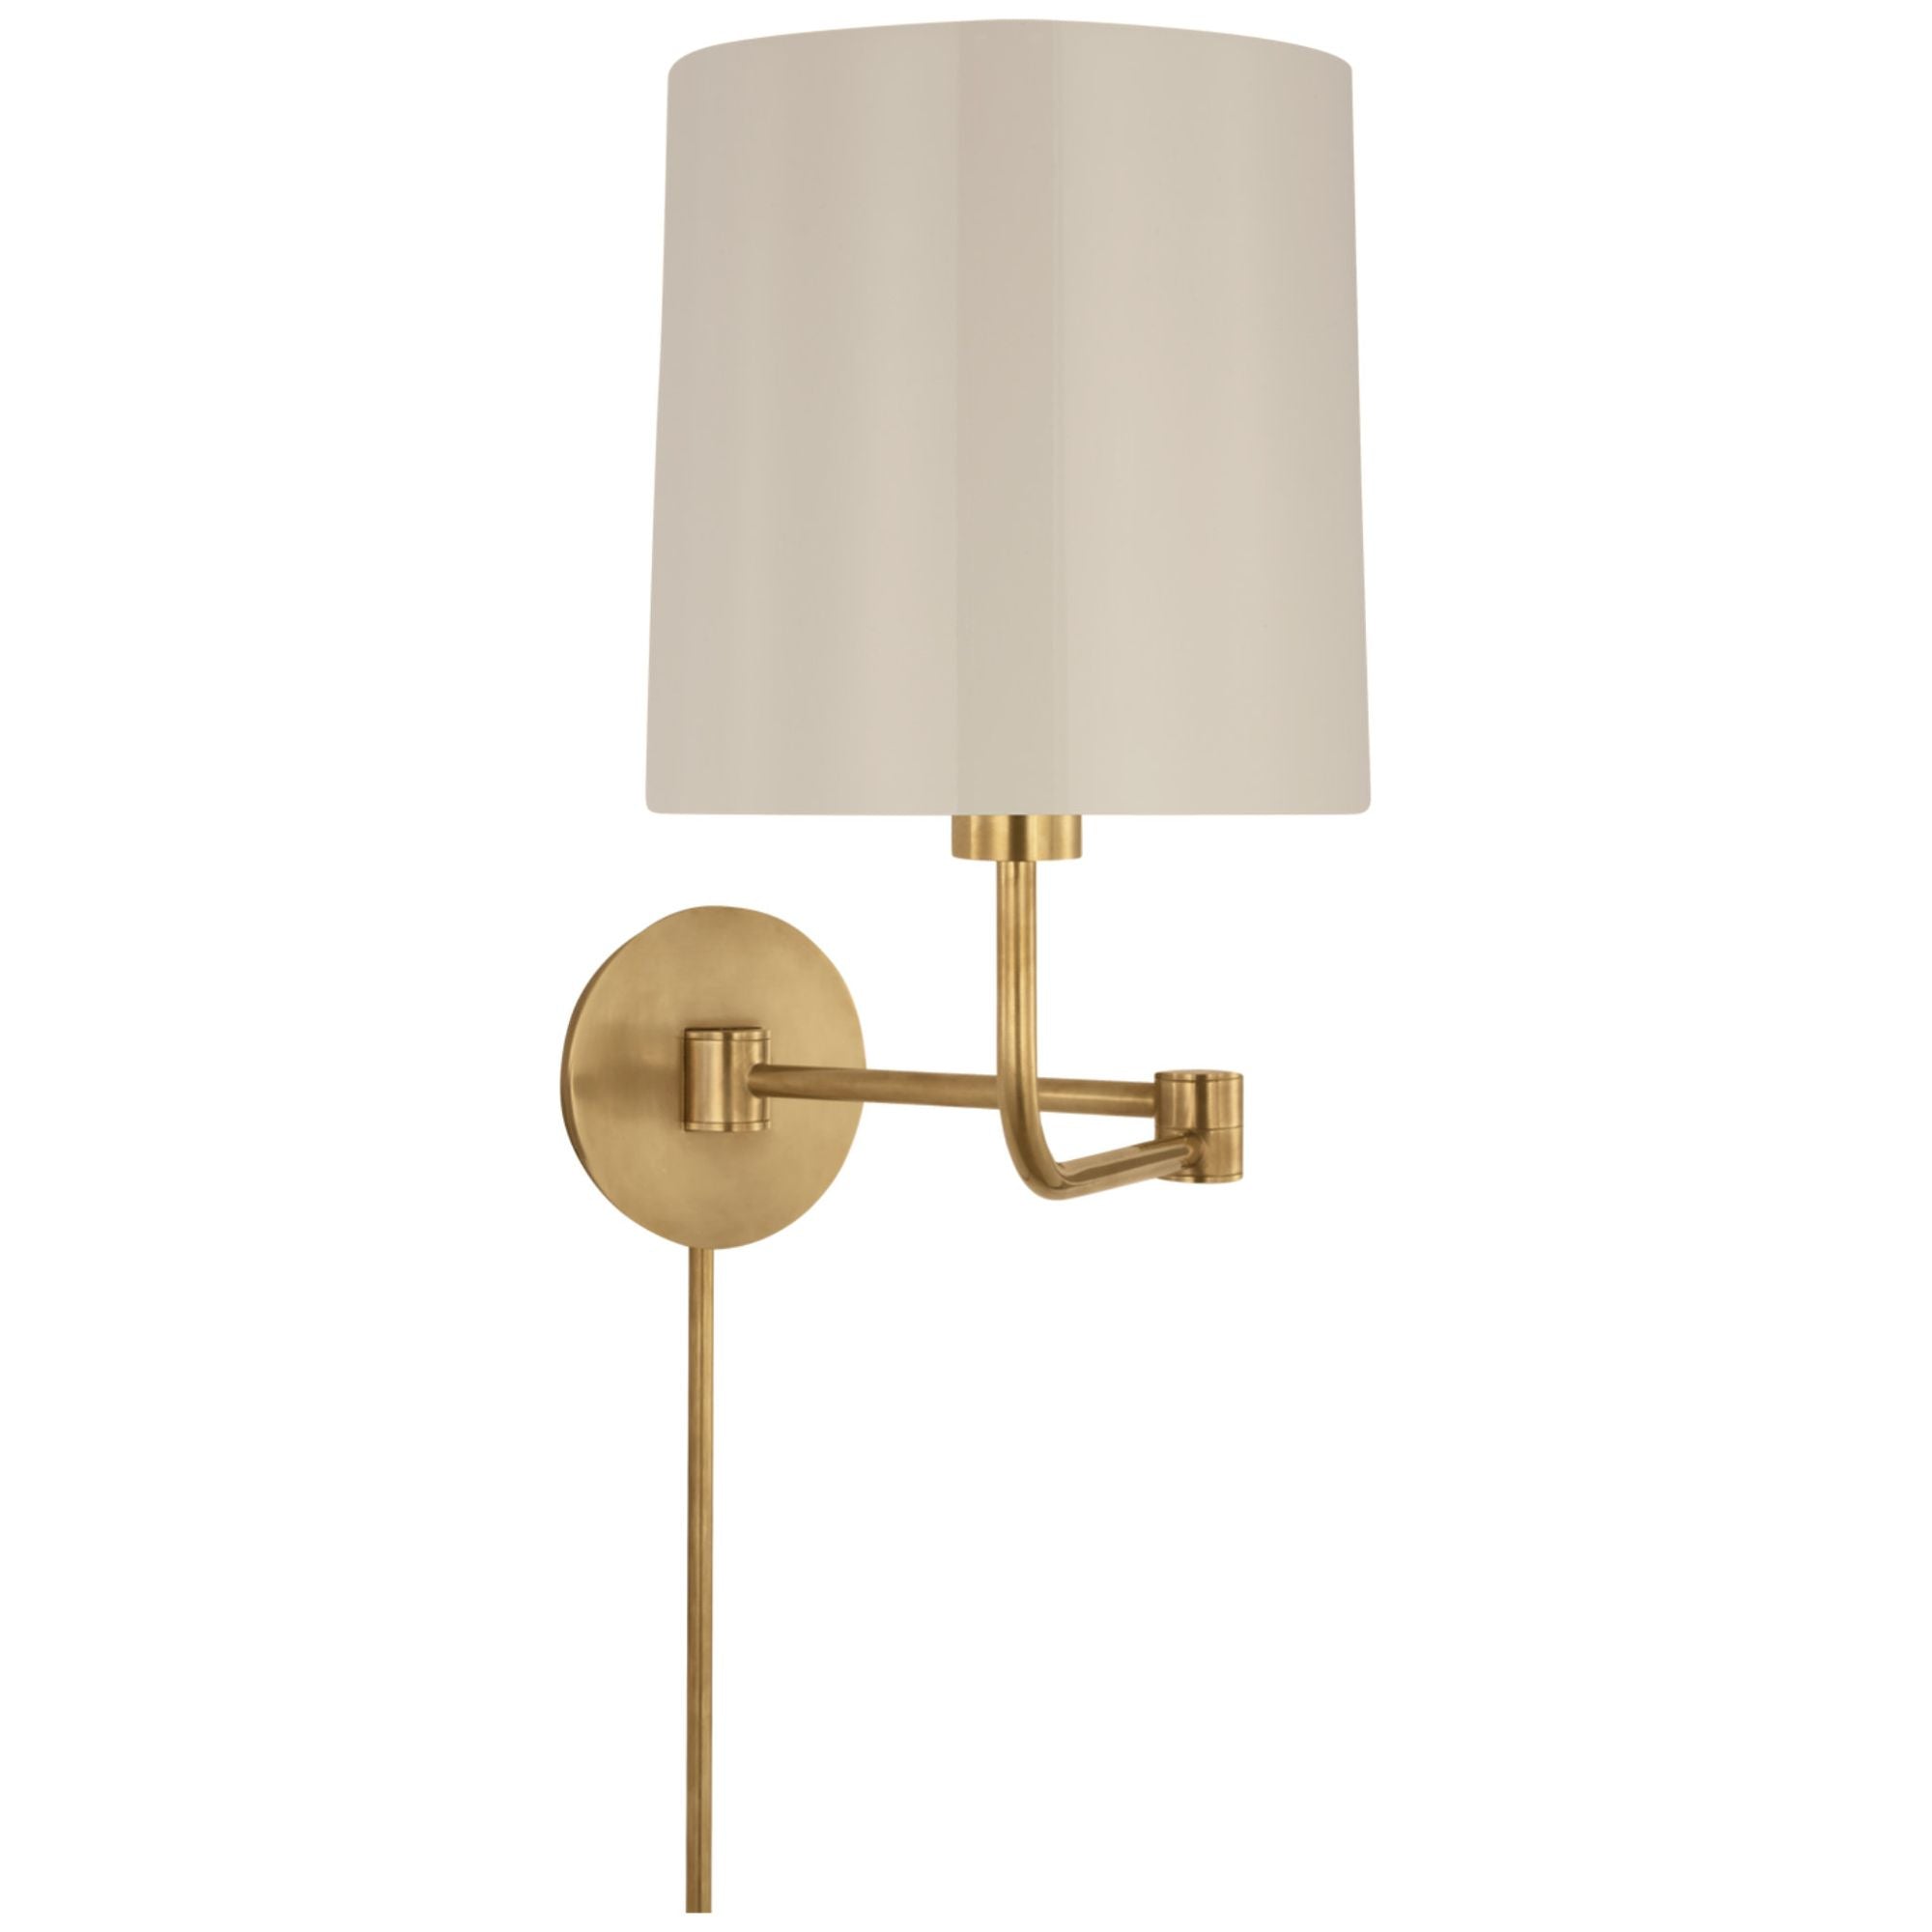 Barbara Barry Go Lightly Swing Arm Wall Light in Soft Brass with China White Shade